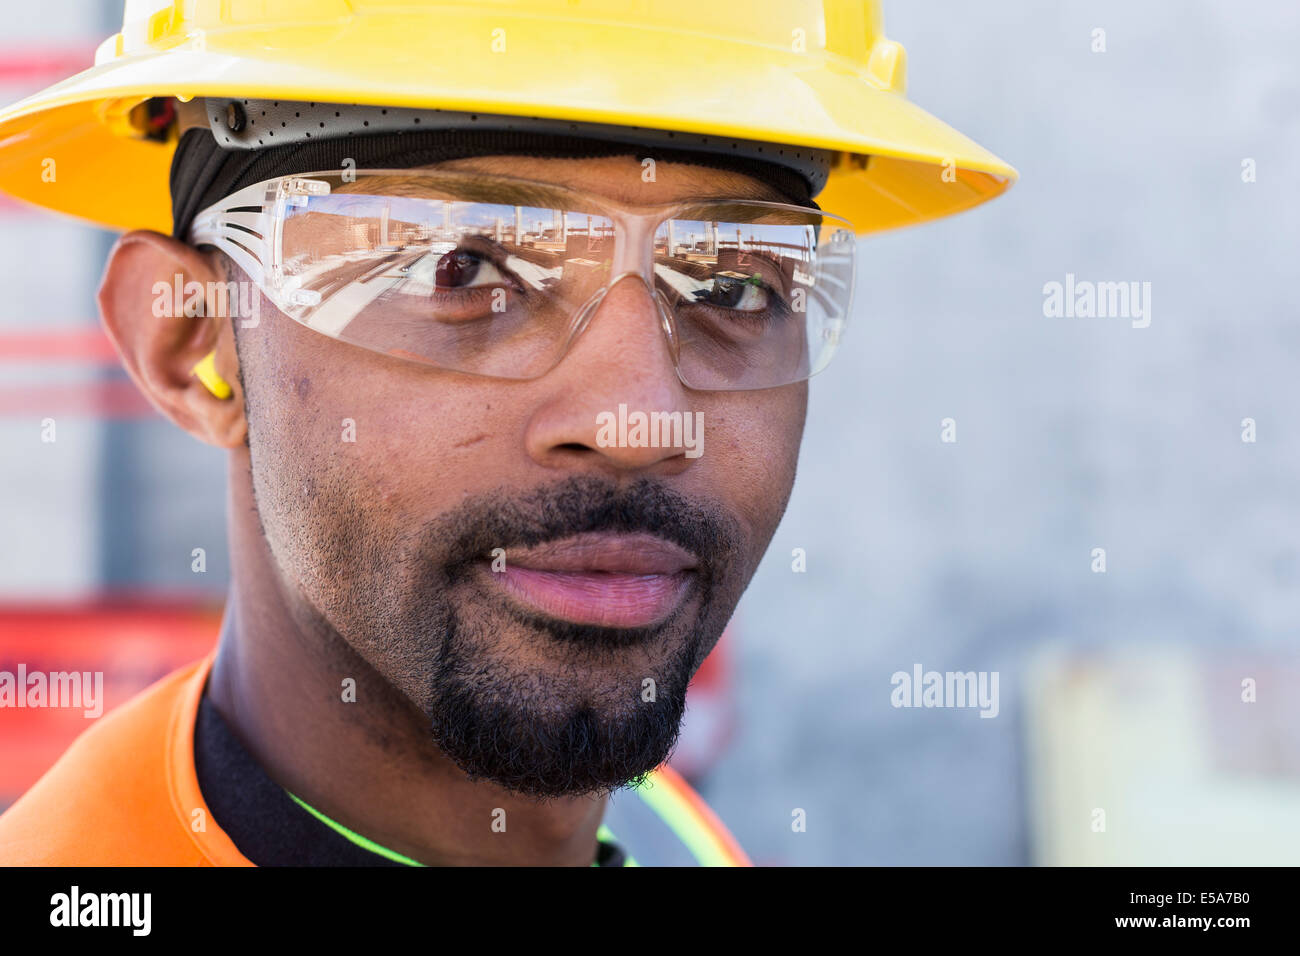 Black worker smiling on construction site Stock Photo